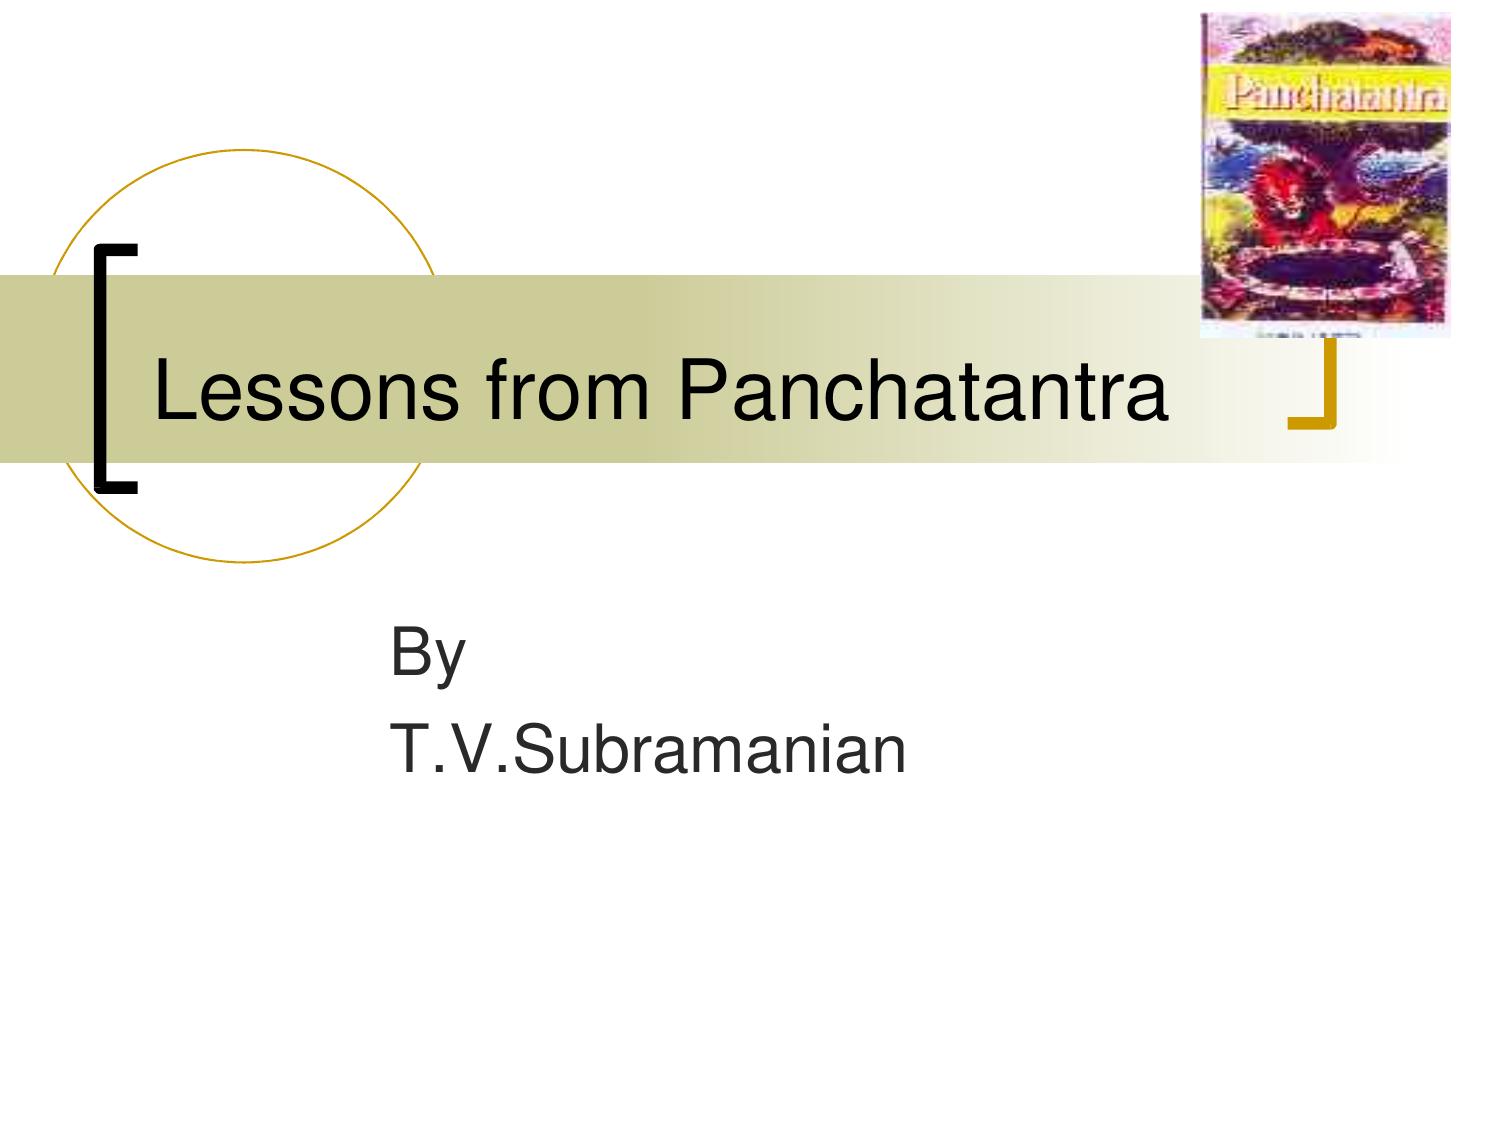 Lessons from Panchatantra by T.V.Subramaniann